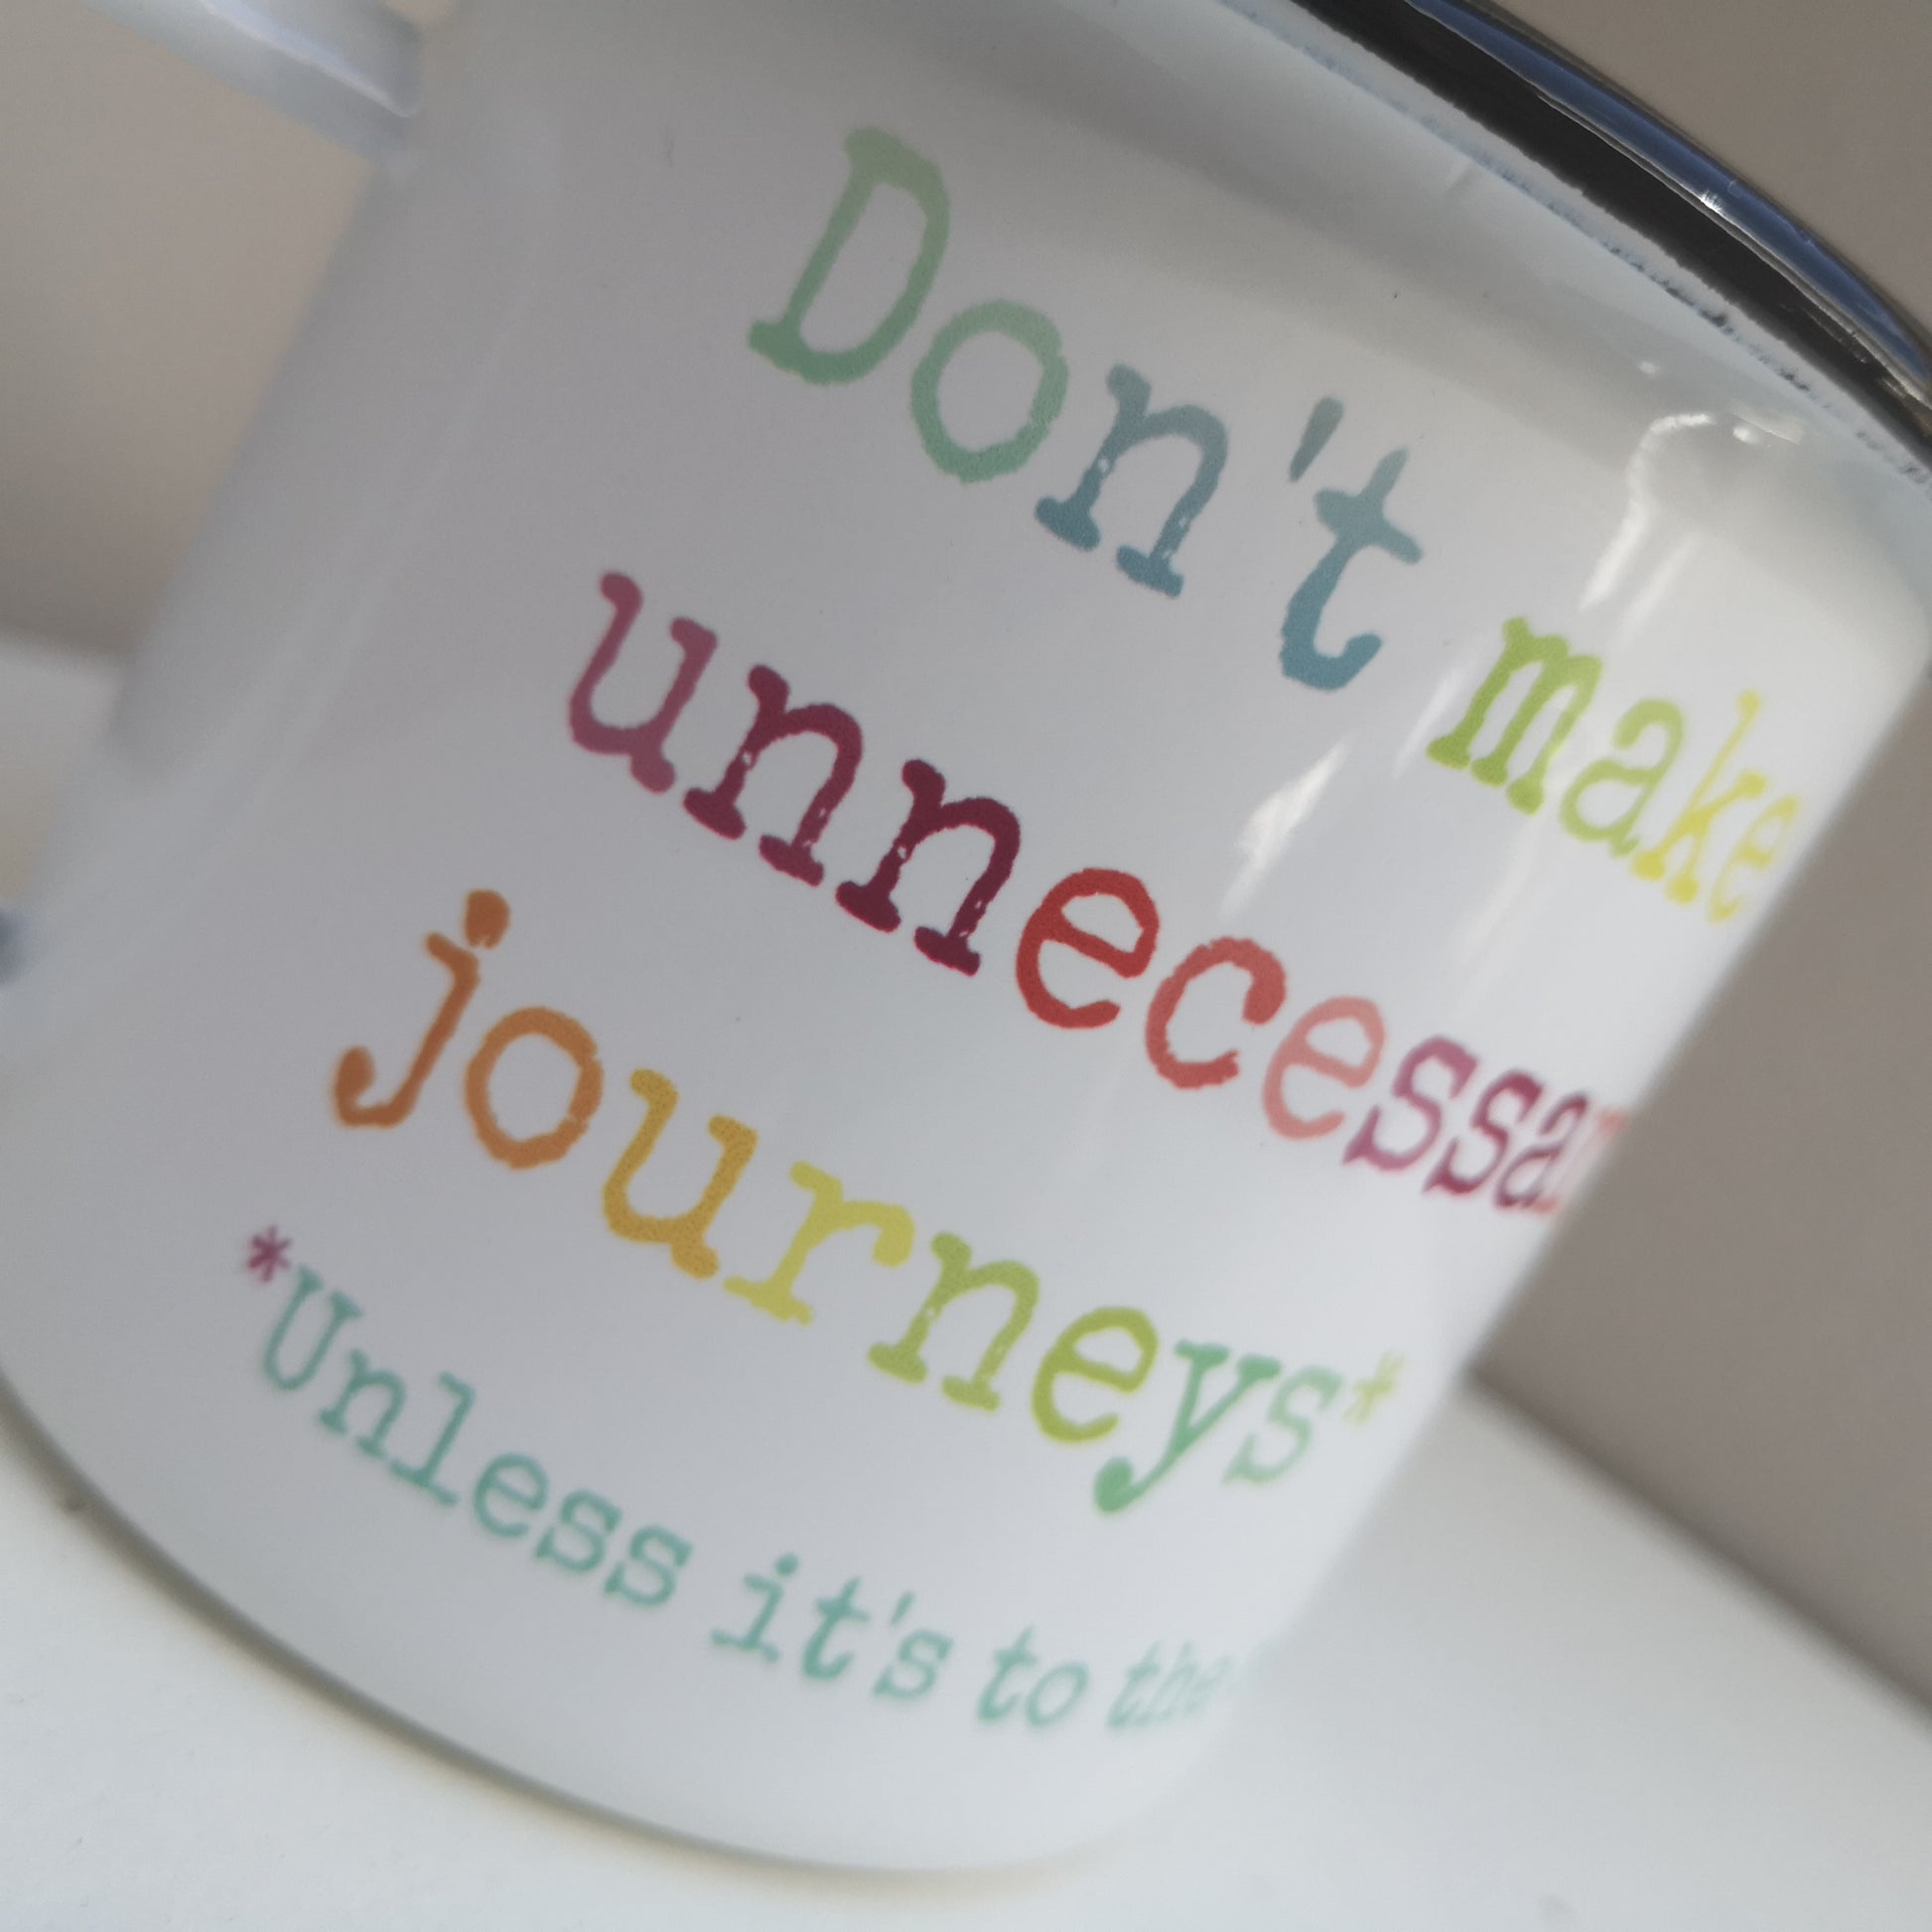 A close up of a white steel enamel mug with the Teresa Mannion catchphrase DON'T MAKE UNNECESSARY JOURNEYS - UNLESS IT'S TO THE SEA written in rainbow coloured type font below